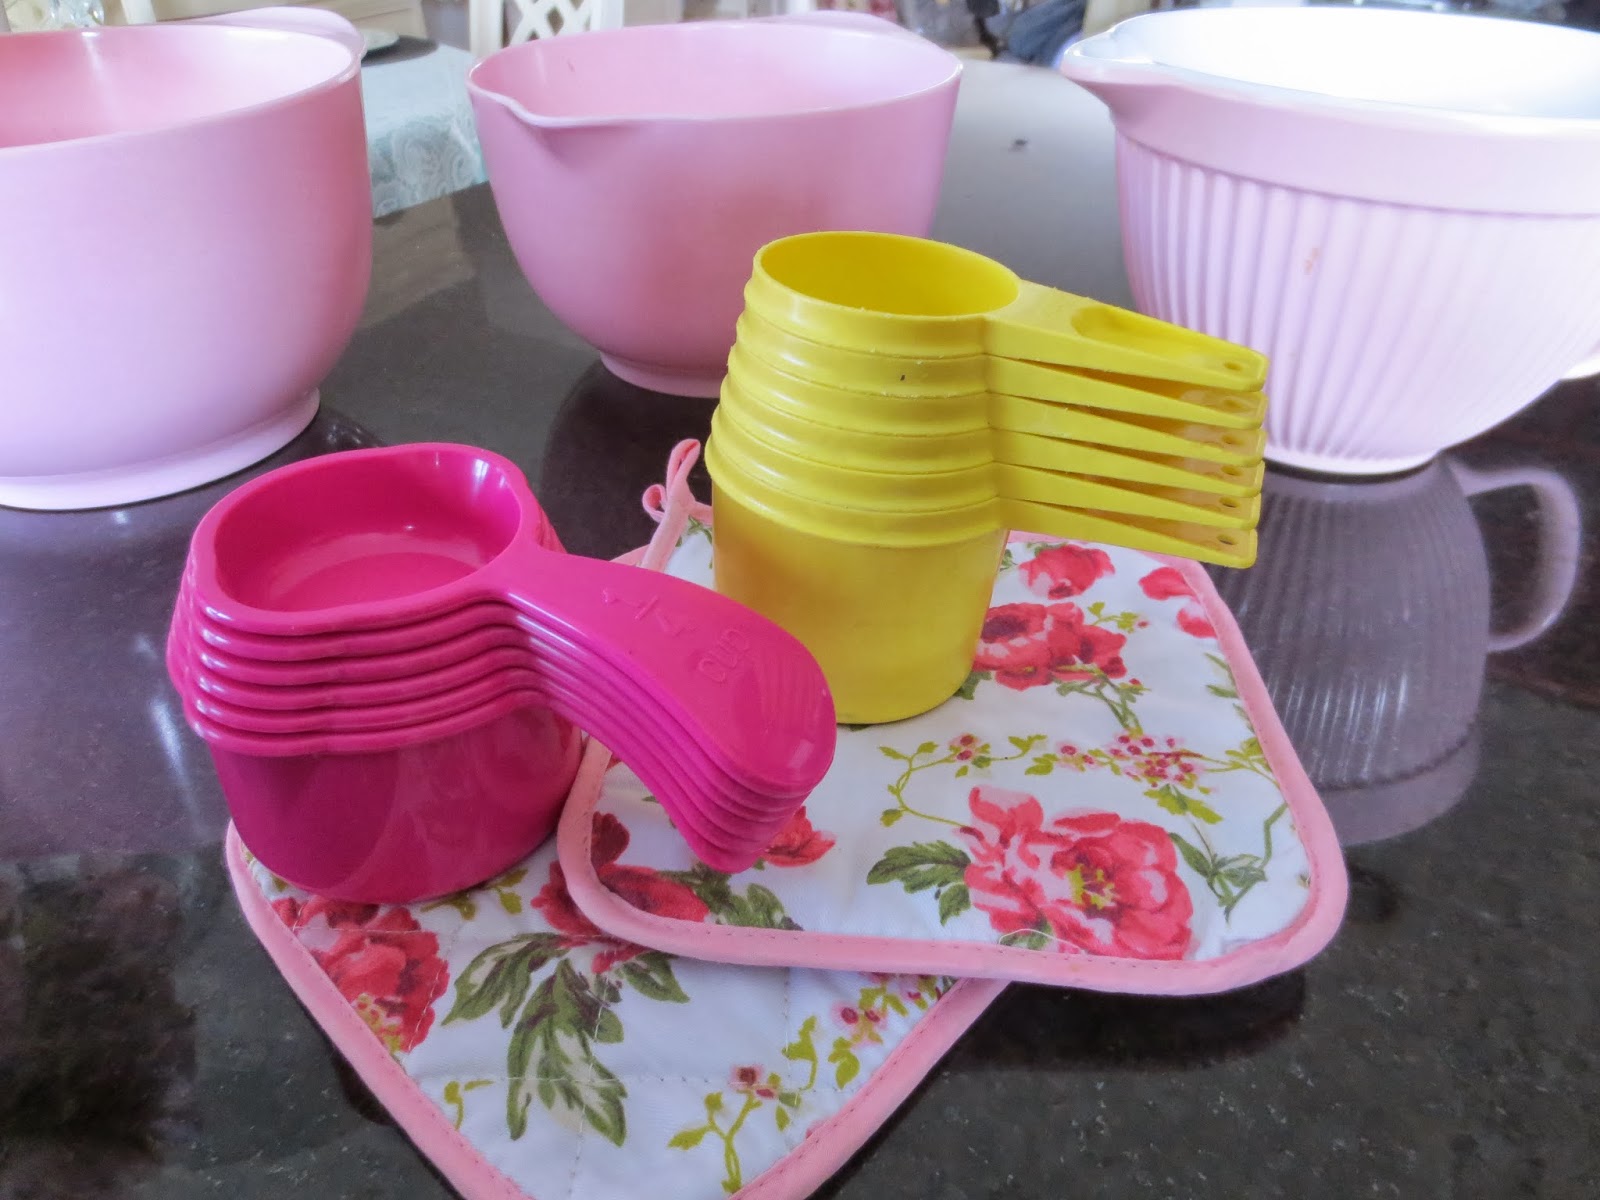 NEW Tupperware Measuring Cups Set of 6 PINK Curved Embossed Handle Baking  Tools